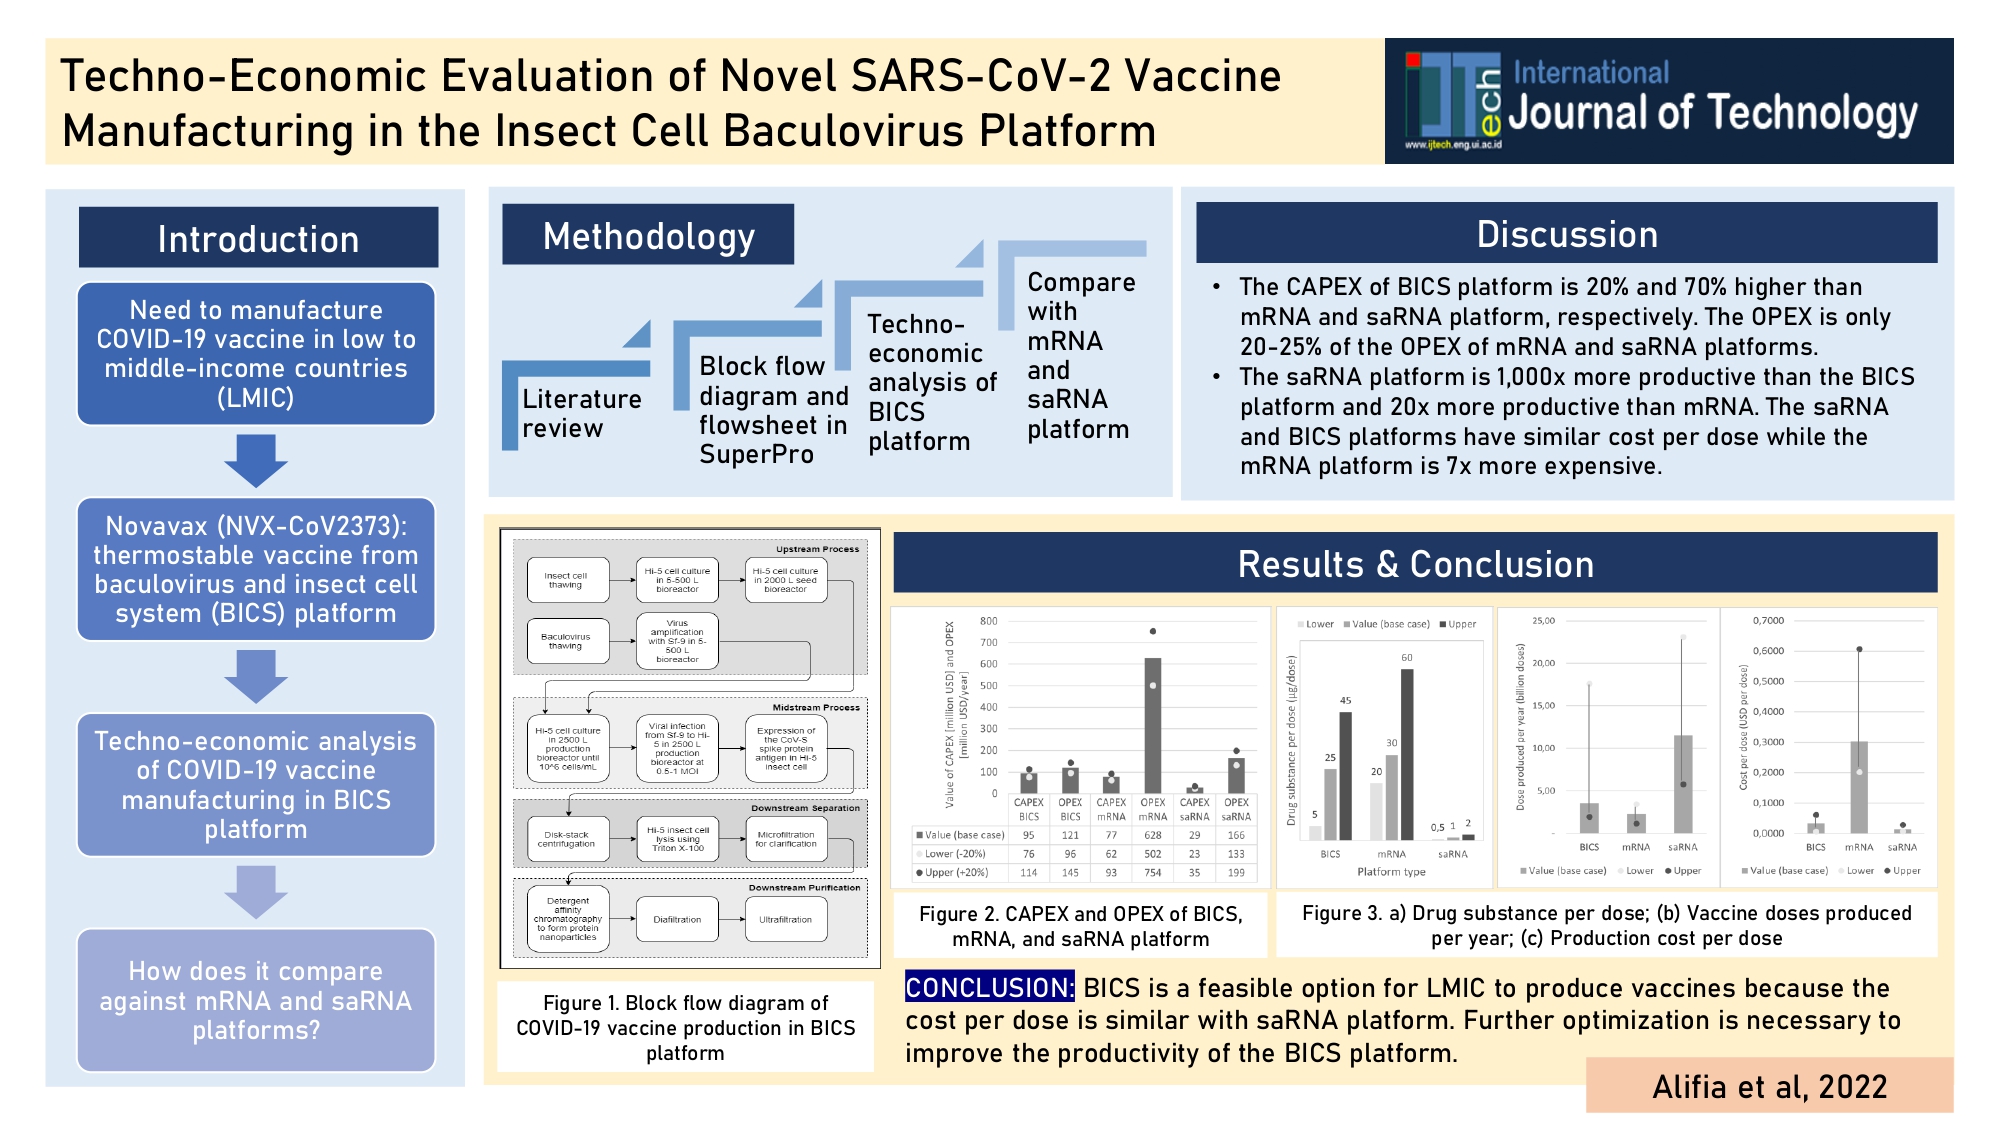 Techno-Economic Evaluation of Novel SARS-CoV-2 Vaccine Manufacturing in the Insect Cell Baculovirus Platform